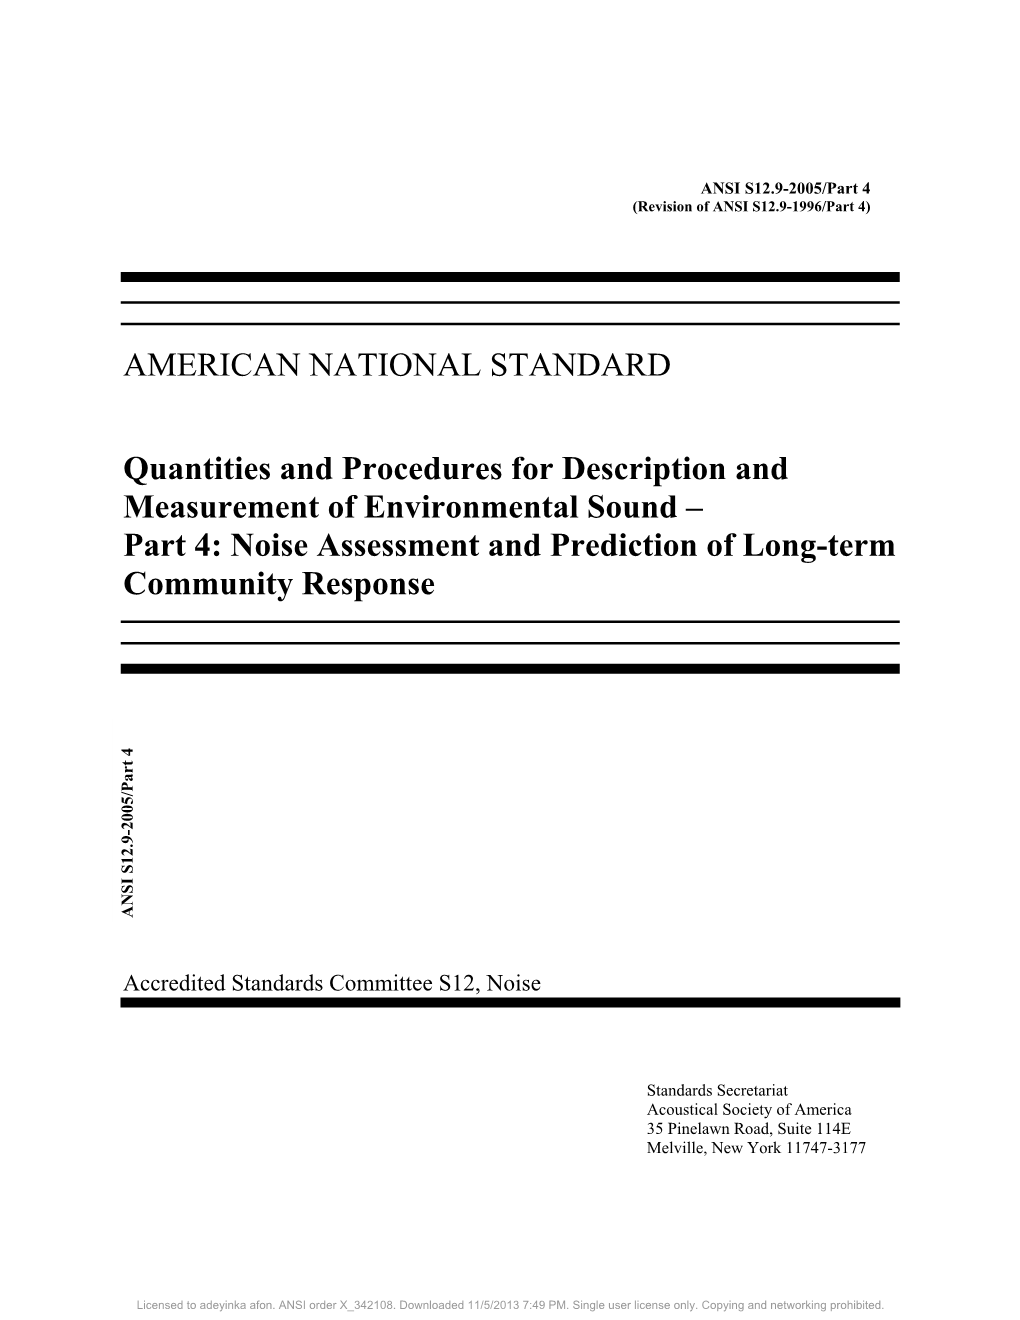 AMERICAN NATIONAL STANDARD Quantities and Procedures For